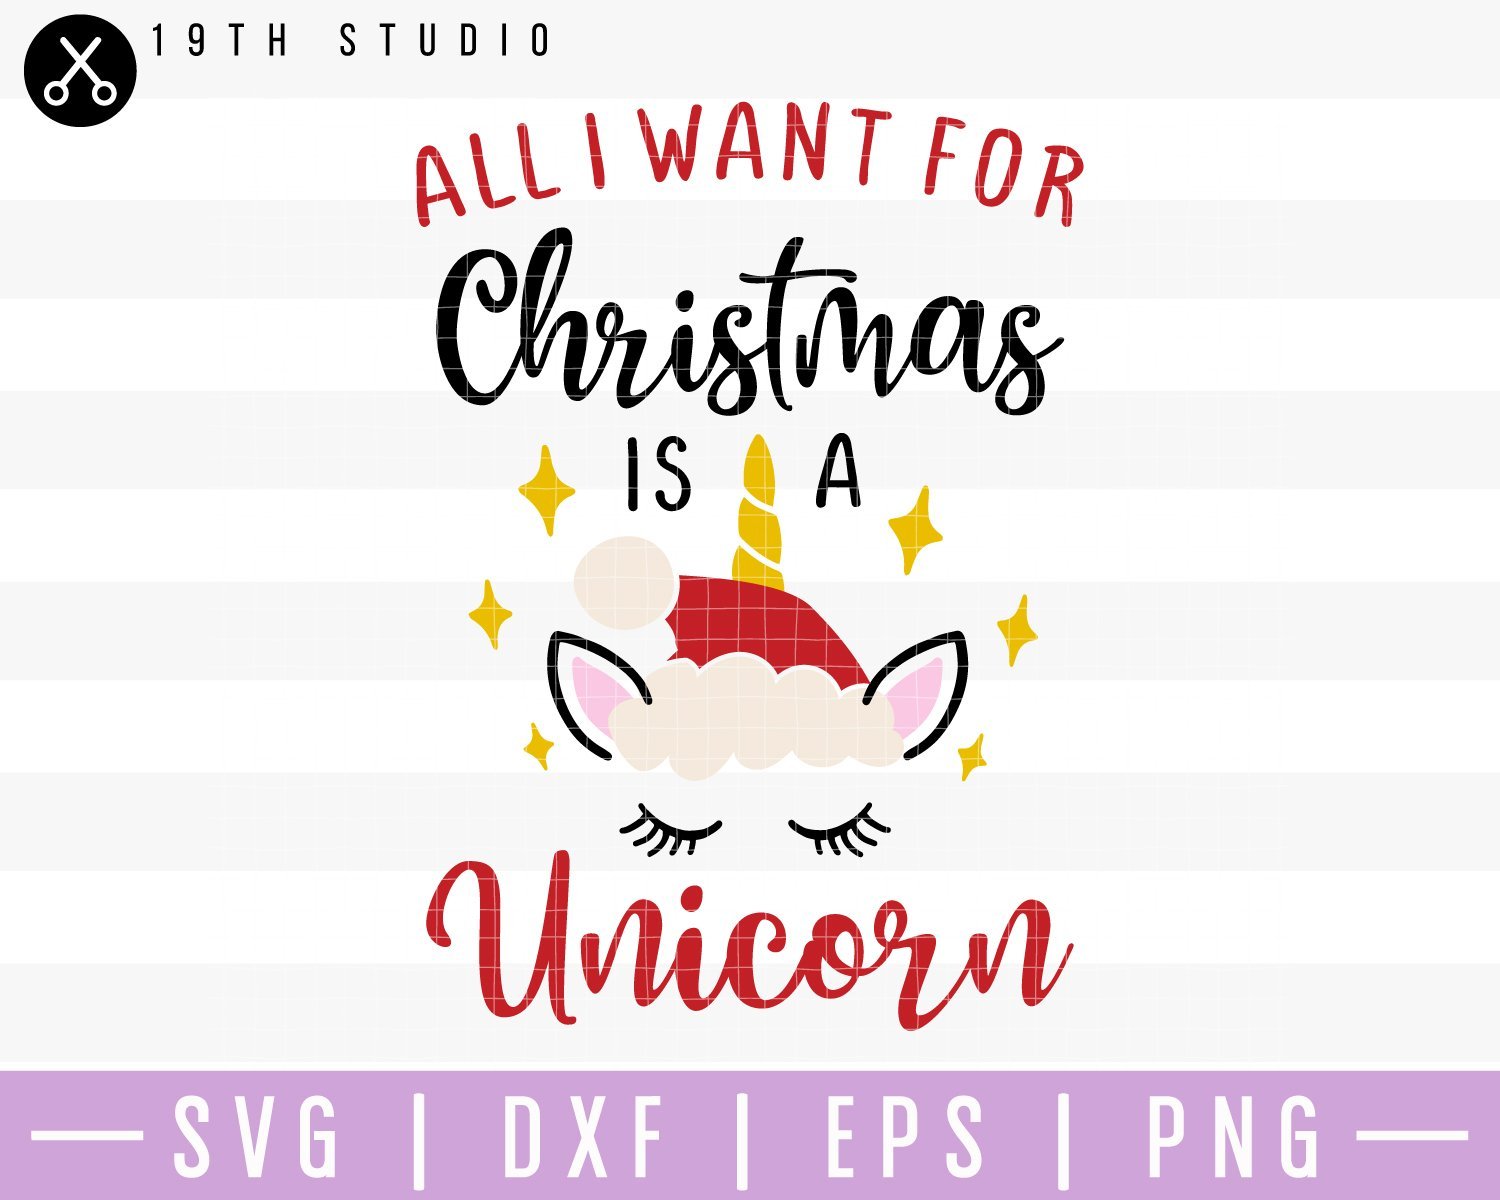 All I want for Christmas is a unicorn SVG | M41F1 Craft House SVG - SVG files for Cricut and Silhouette